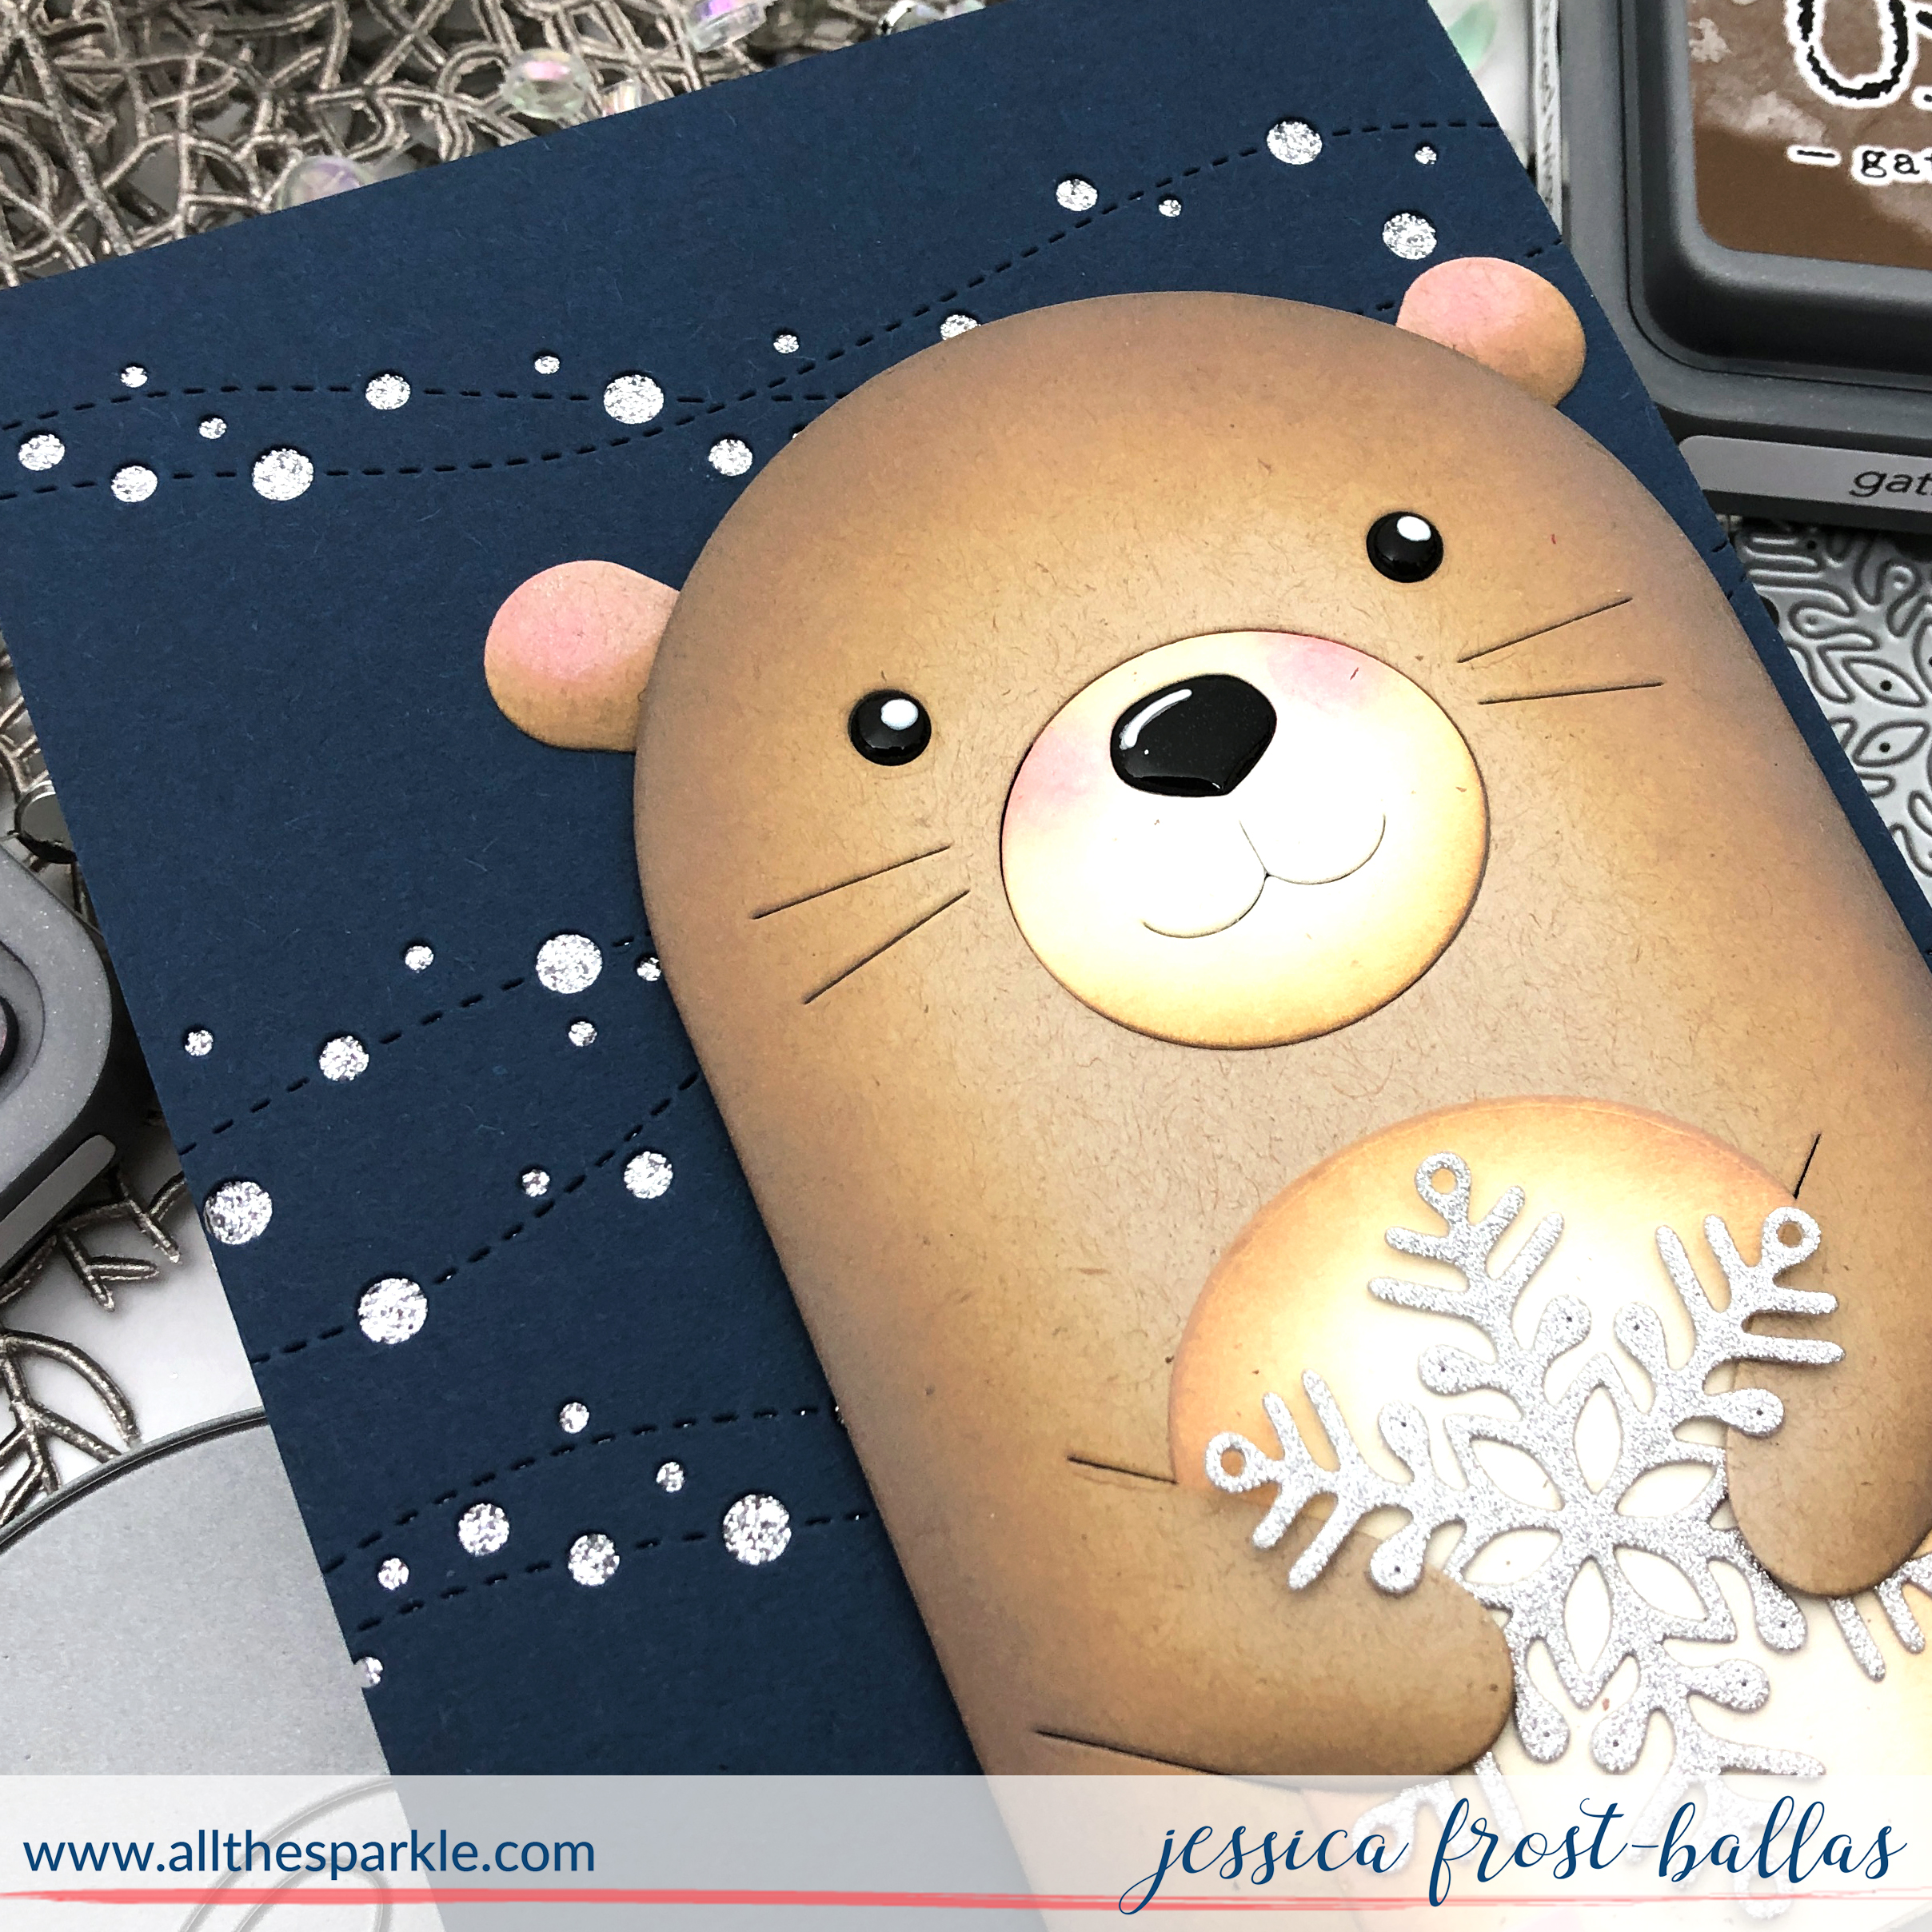 There's No Otter Like You by Jessica Frost-Ballas for Simon Says Stamp, DieCember 2018